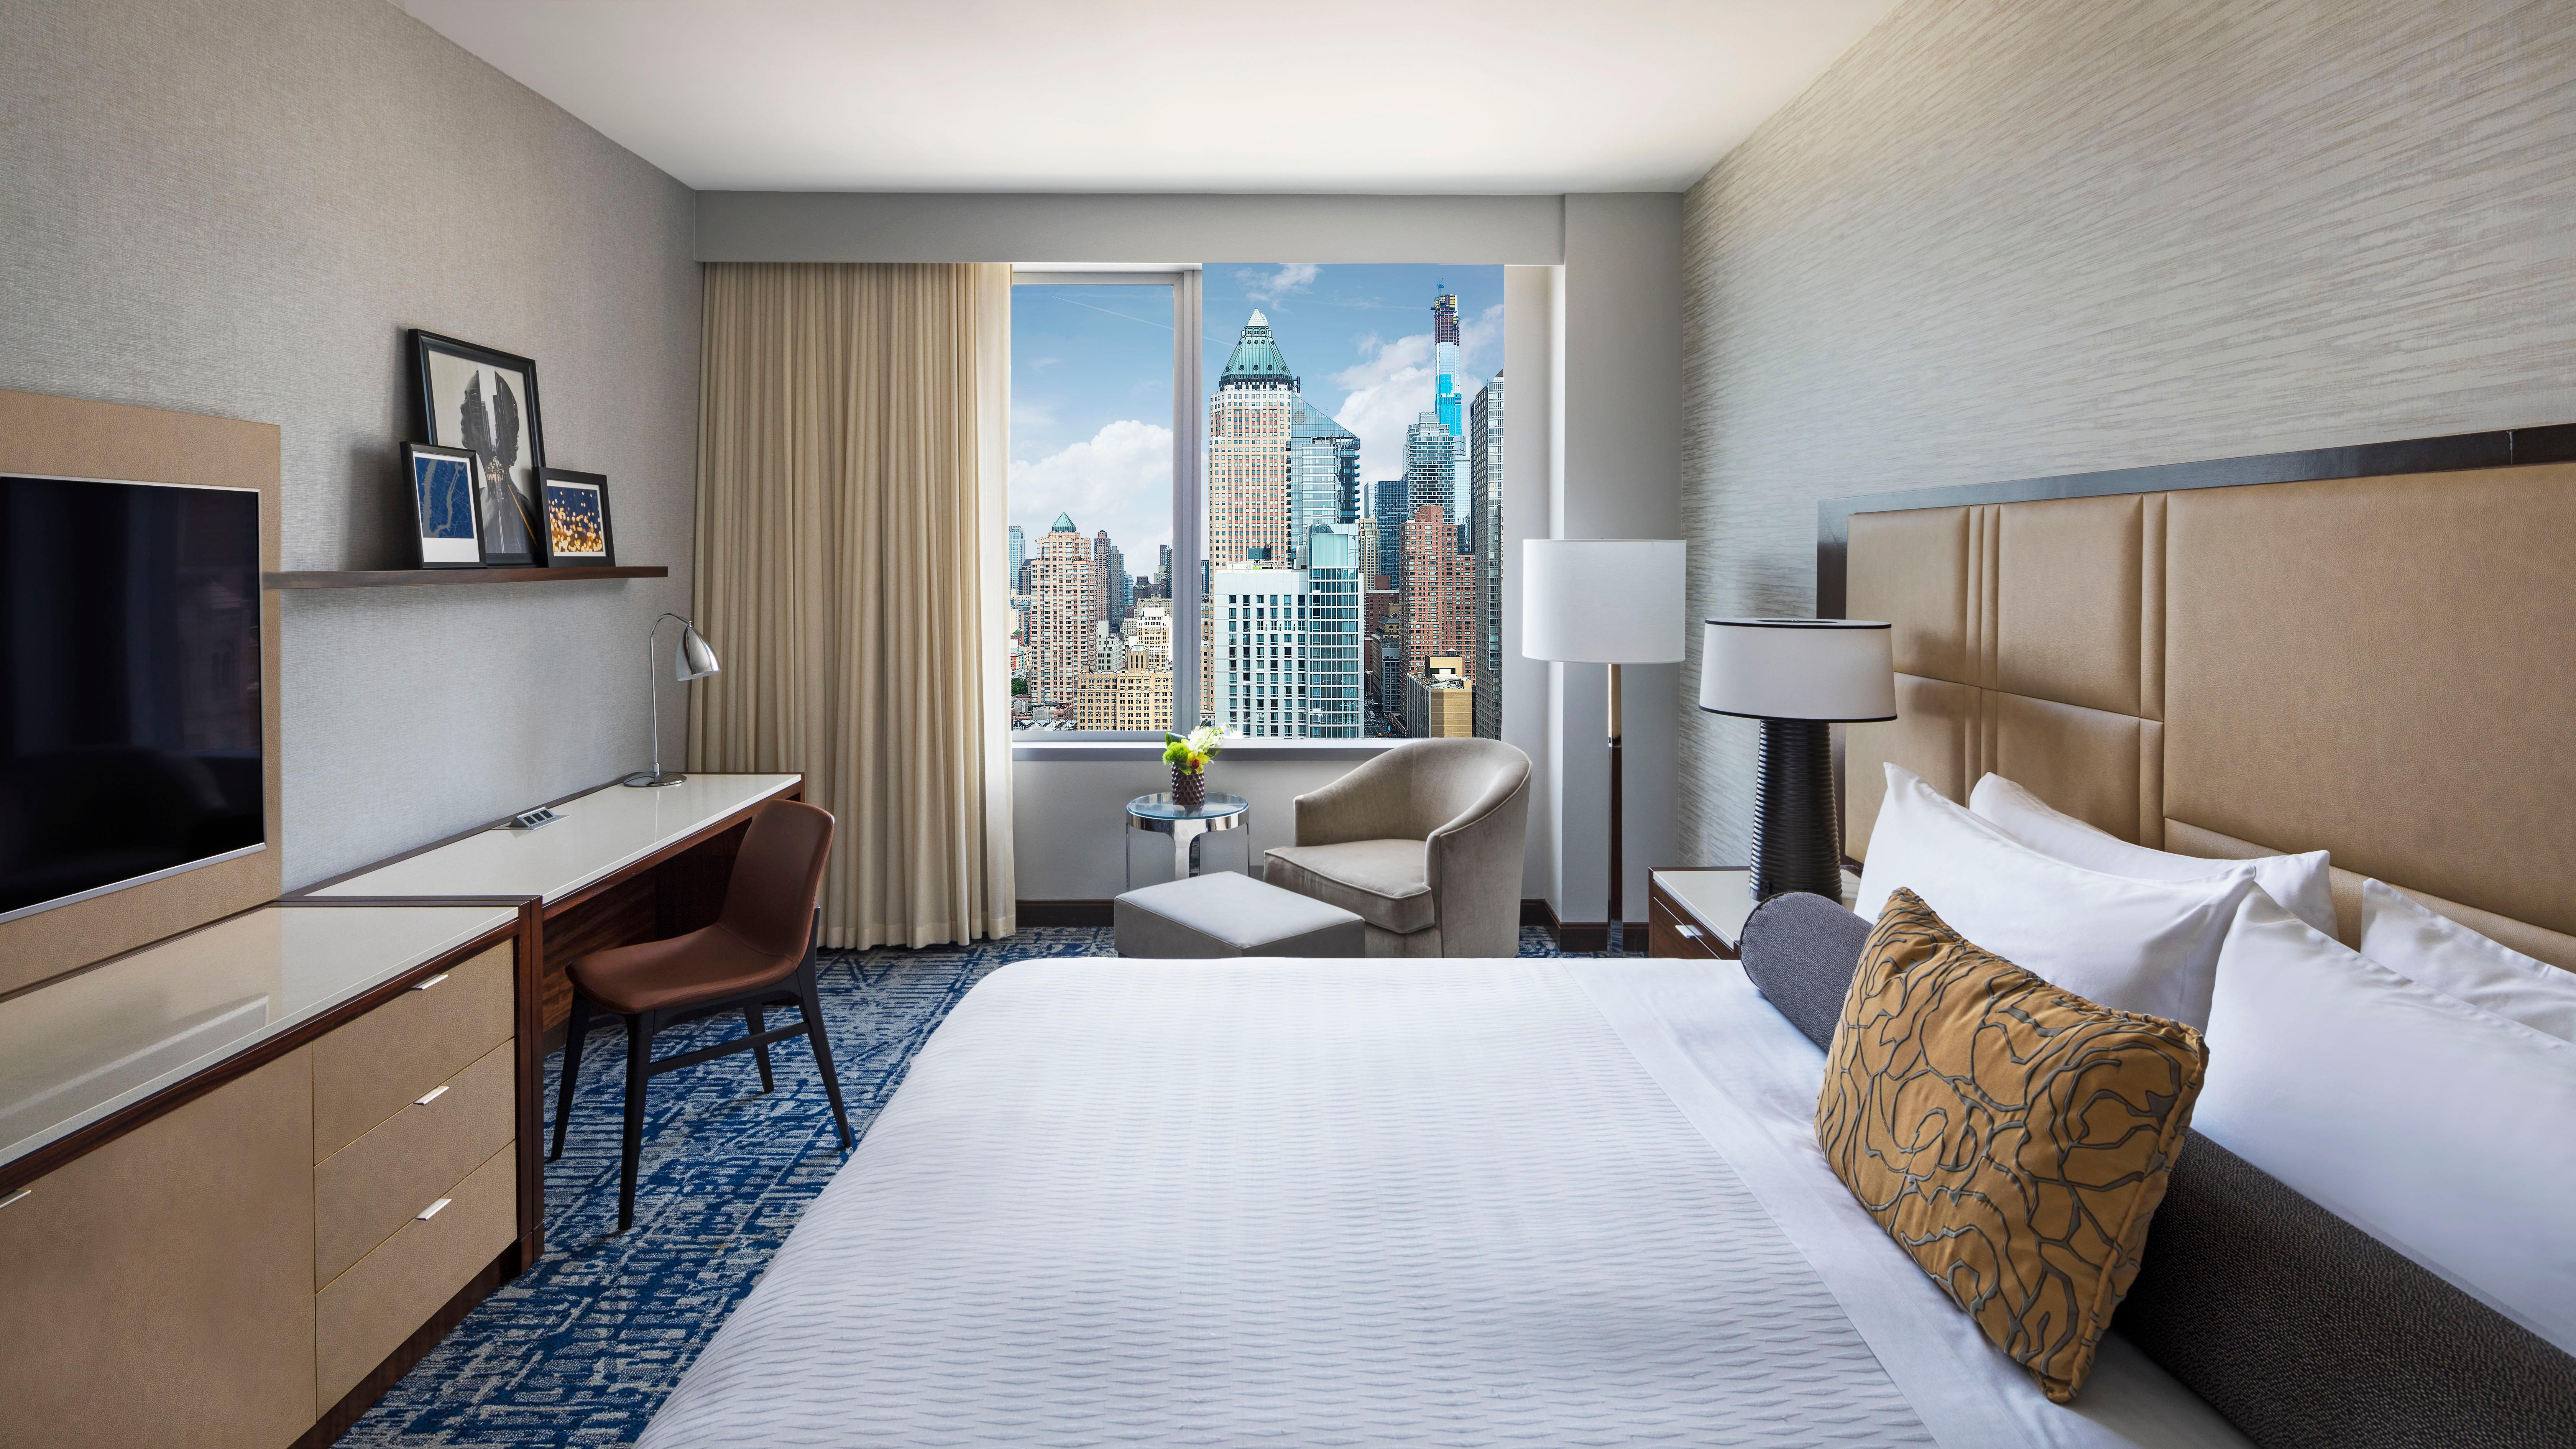 Gallery image of Intercontinental New York Times Square